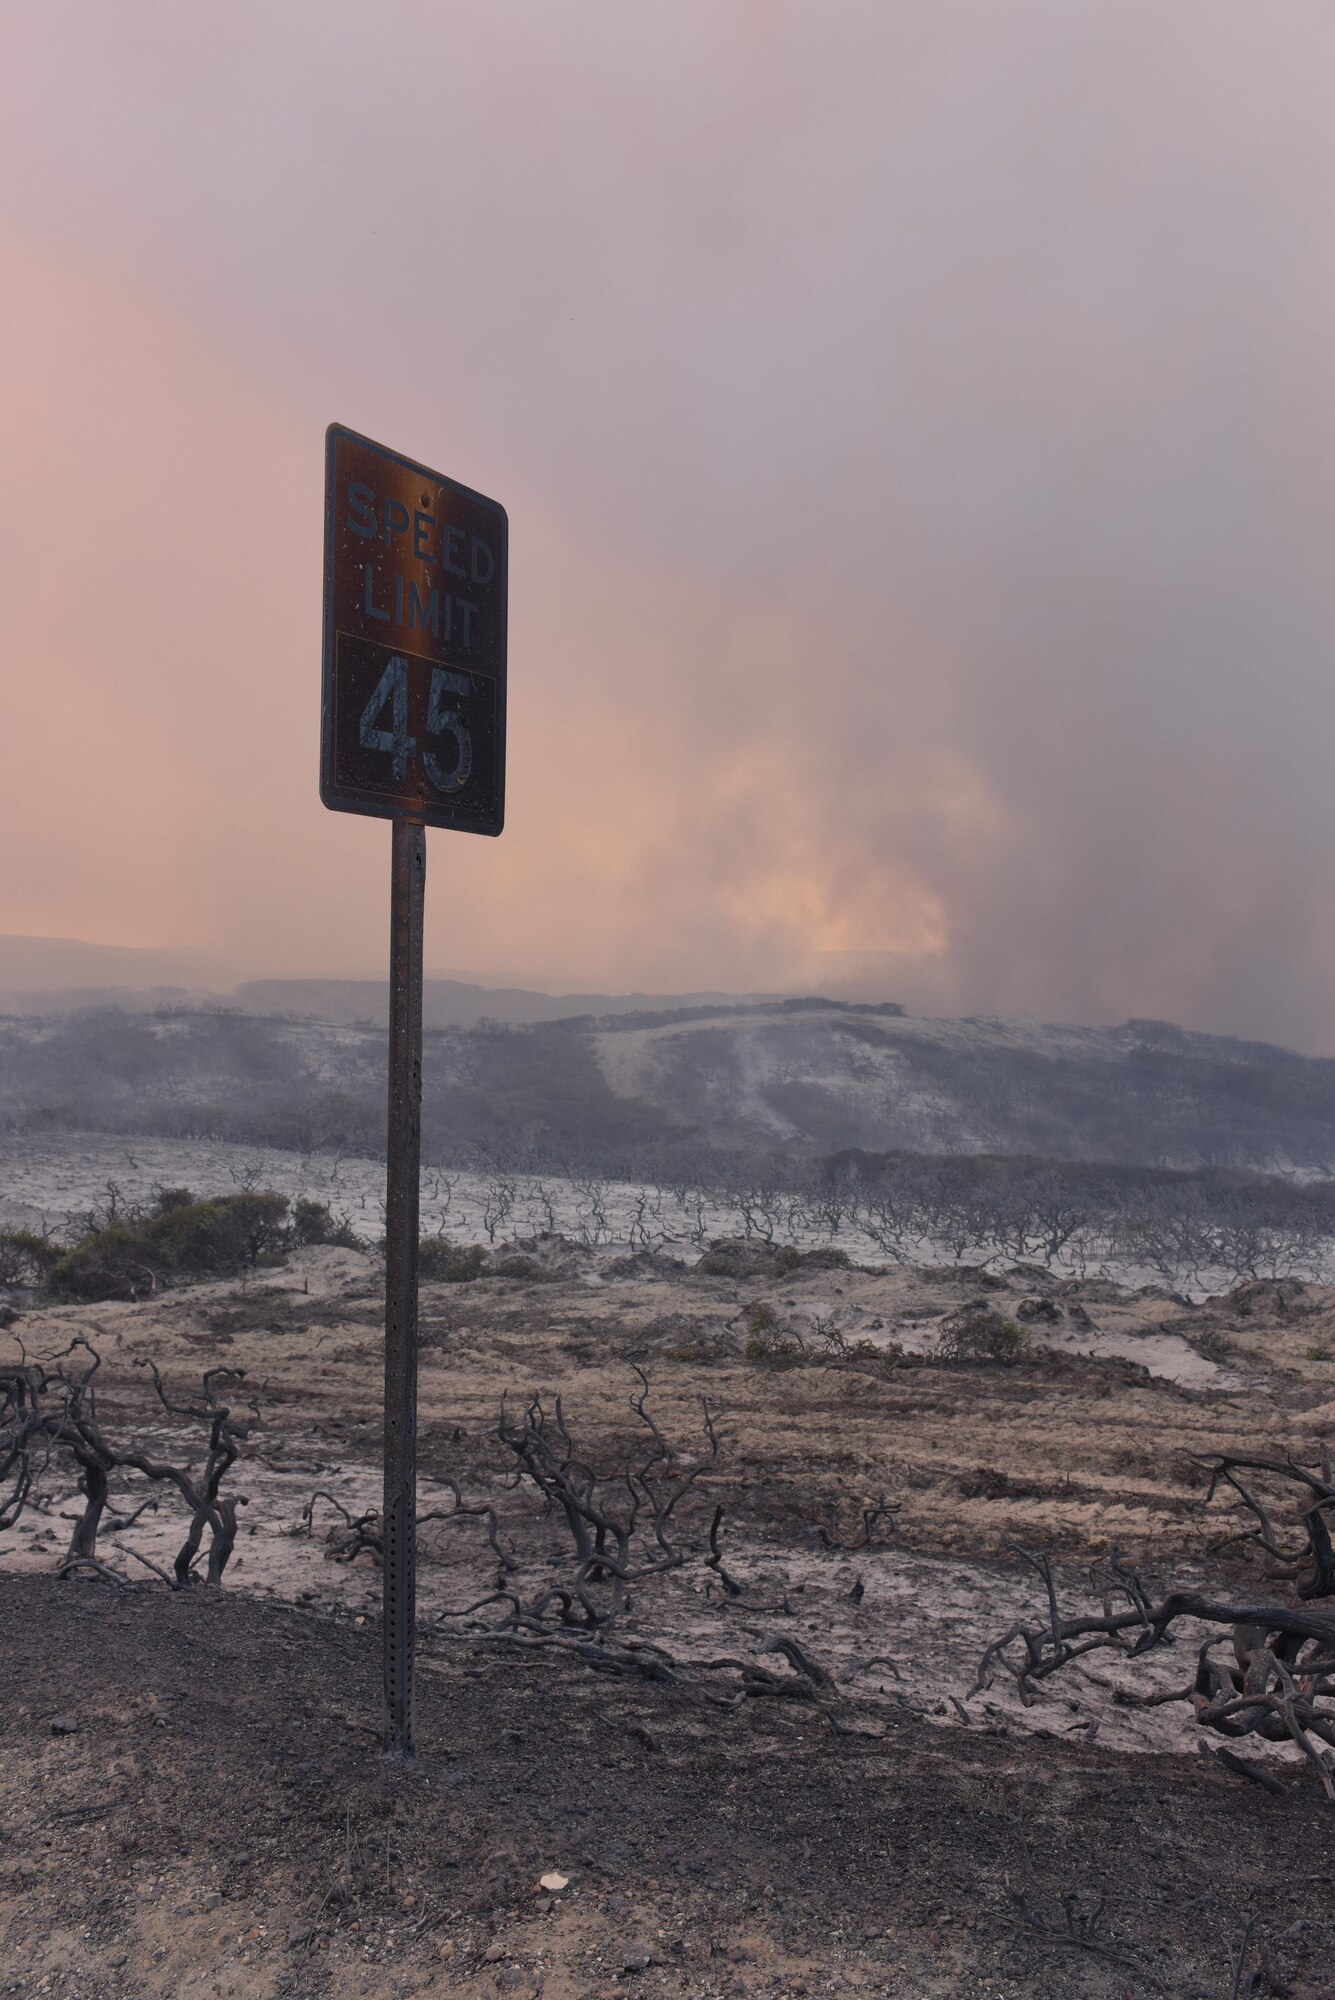 A speed limit sign on South Vandenberg is shown burned after a significant fire swept through portions of South Base, Sept. 20, 2016, Vandenberg Air Force Base, Calif. Vandenberg personnel, alongside community partners and a specialized incident management team, have worked to extinguish five separate wildland fires, here, since Sept. 17. (U.S. Air Force photo by Staff Staff Sgt. Shane Phipps/Released)